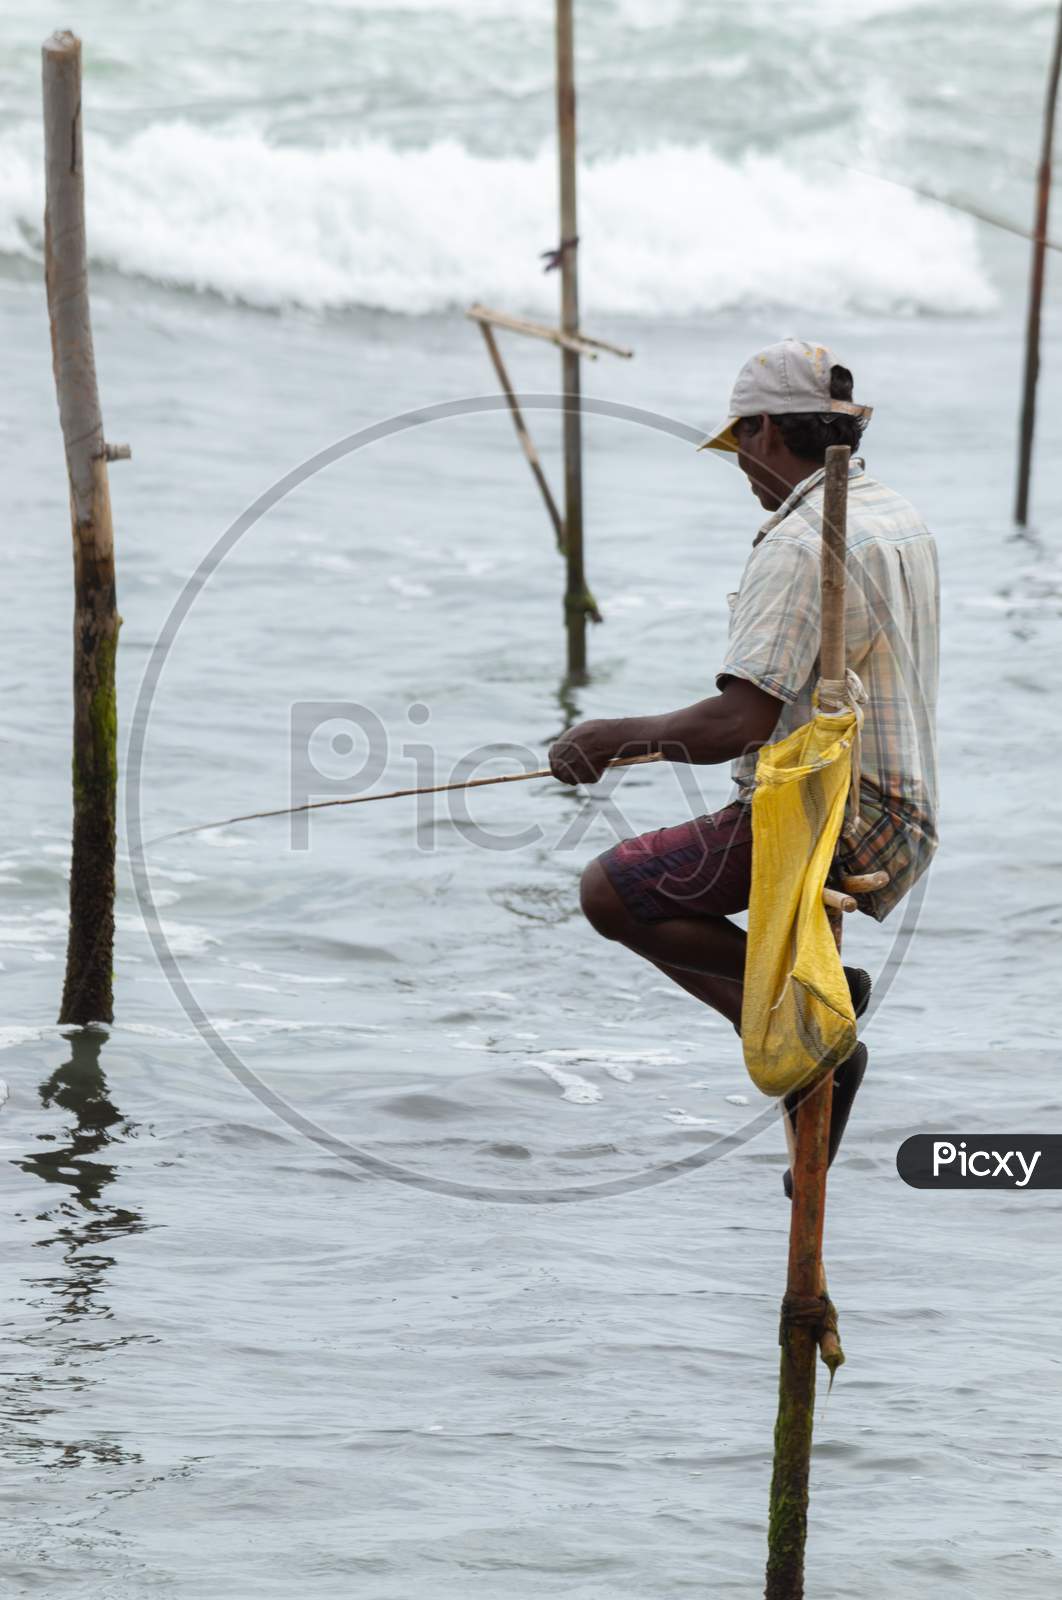 Stilt Fisherman With His Wooden Rod Facing Side To The Camera With His Yellow Pocket On The Pole, Fishing In A Traditional Unique Method In Sri Lankan Culture, Sunny Bright Evening On The Beach.